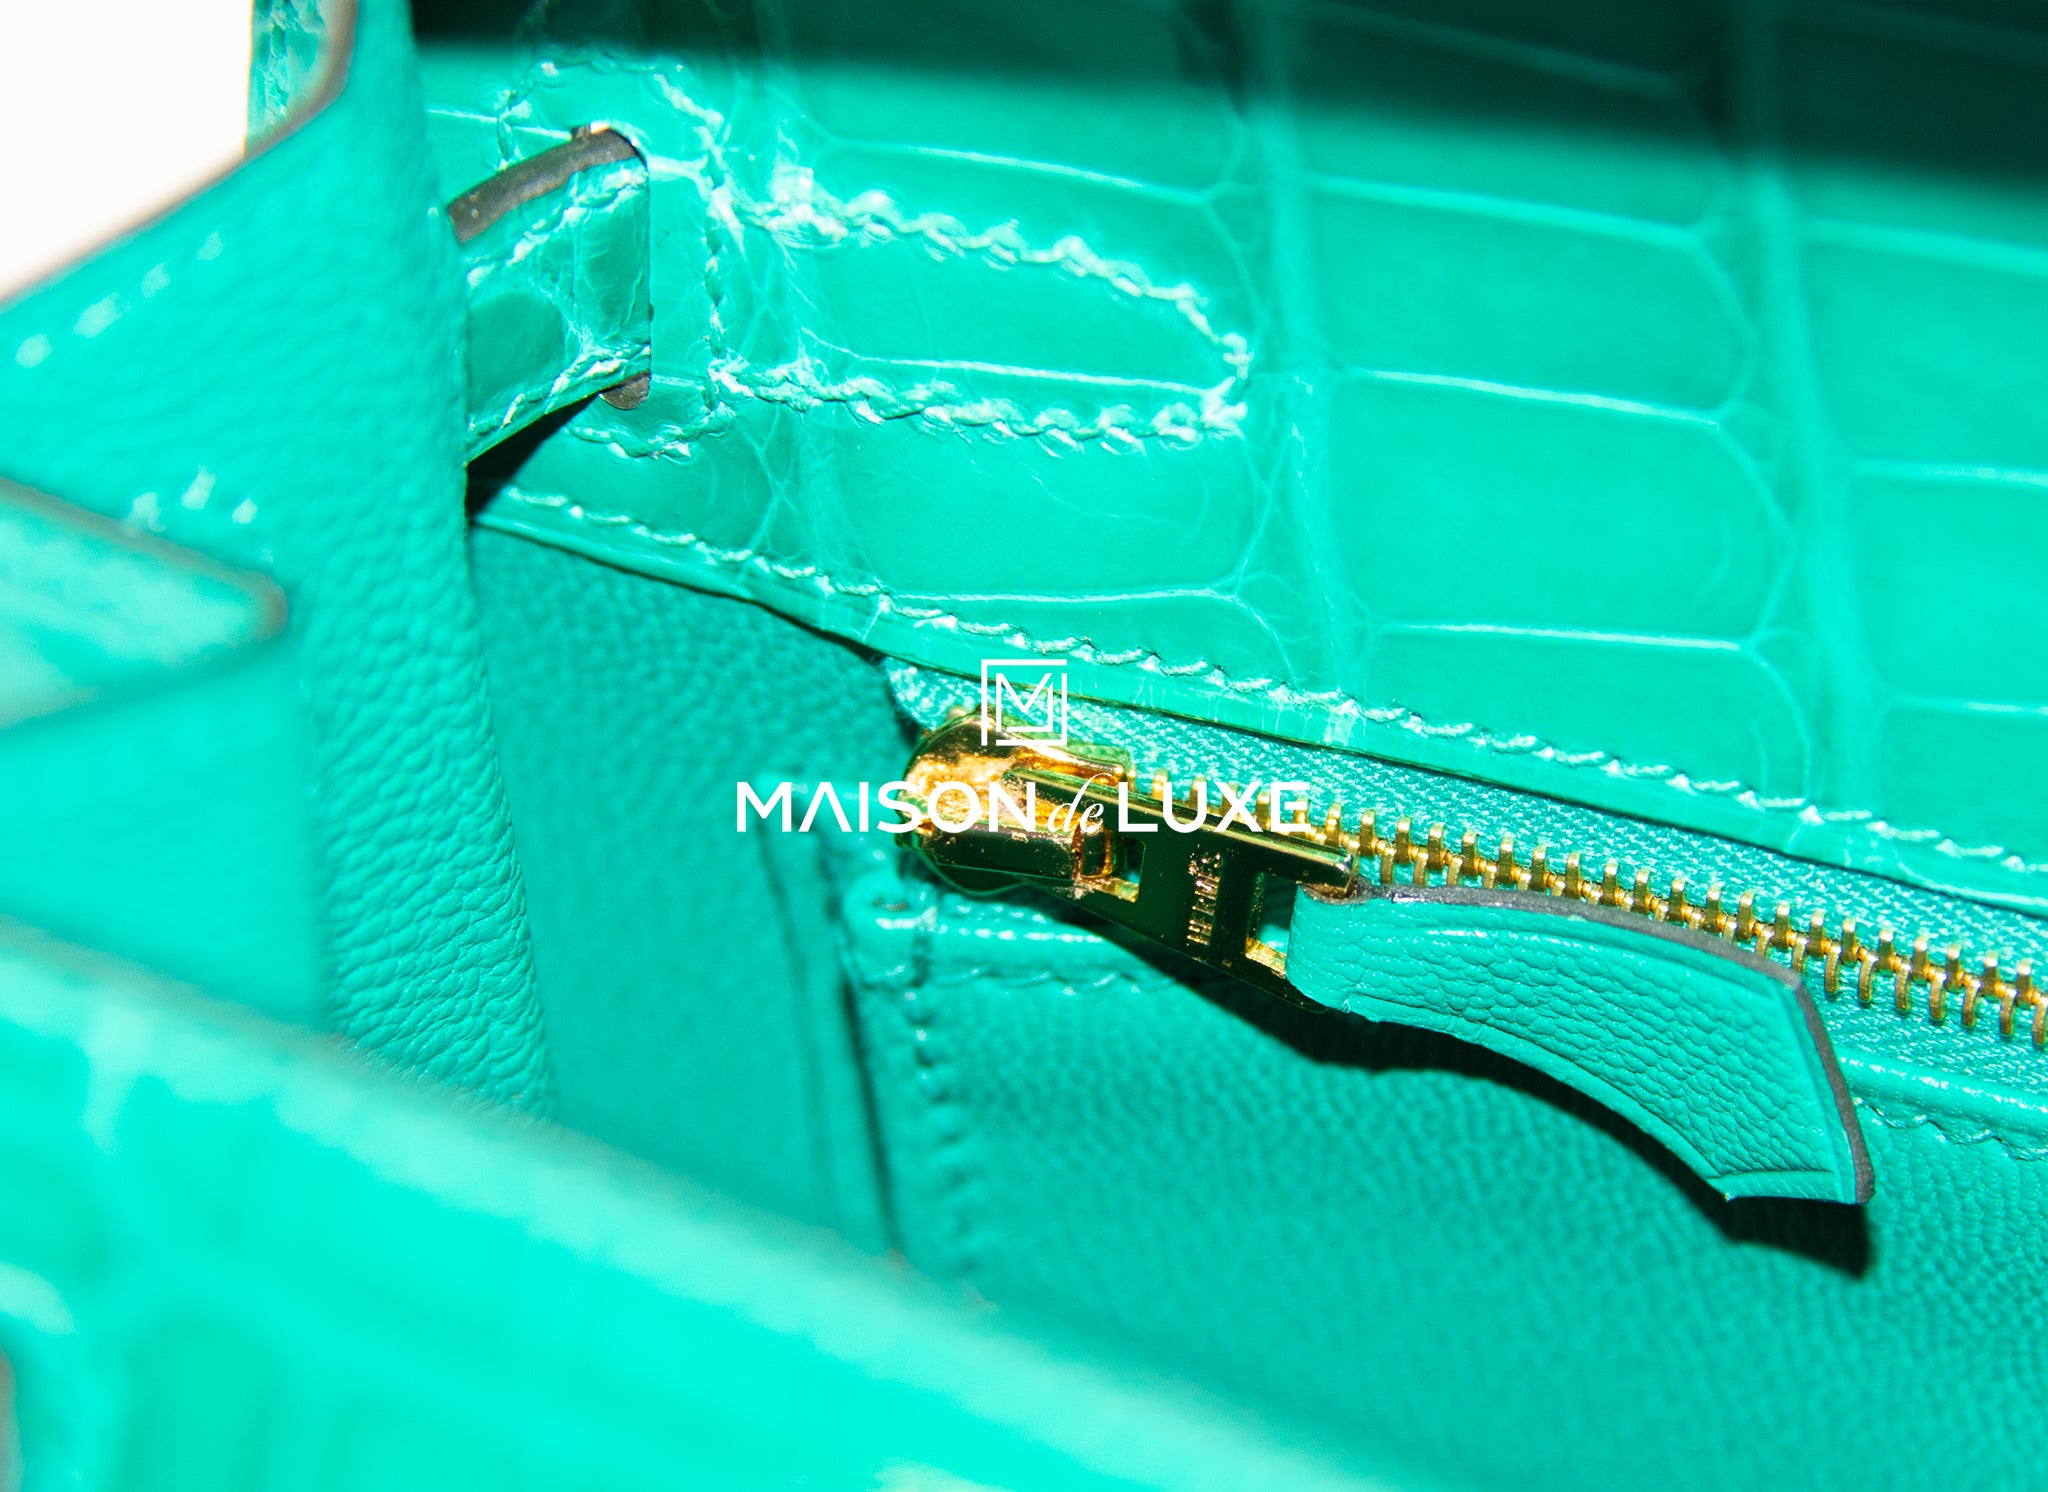 A LIMITED EDITION SHINY VERT JADE NILOTICUS CROCODILE & VERT VÉRONE MADAME  LEATHER SELLIER TOUCH KELLY 25 WITH PALLADIUM HARDWARE, HERMÈS, 2021